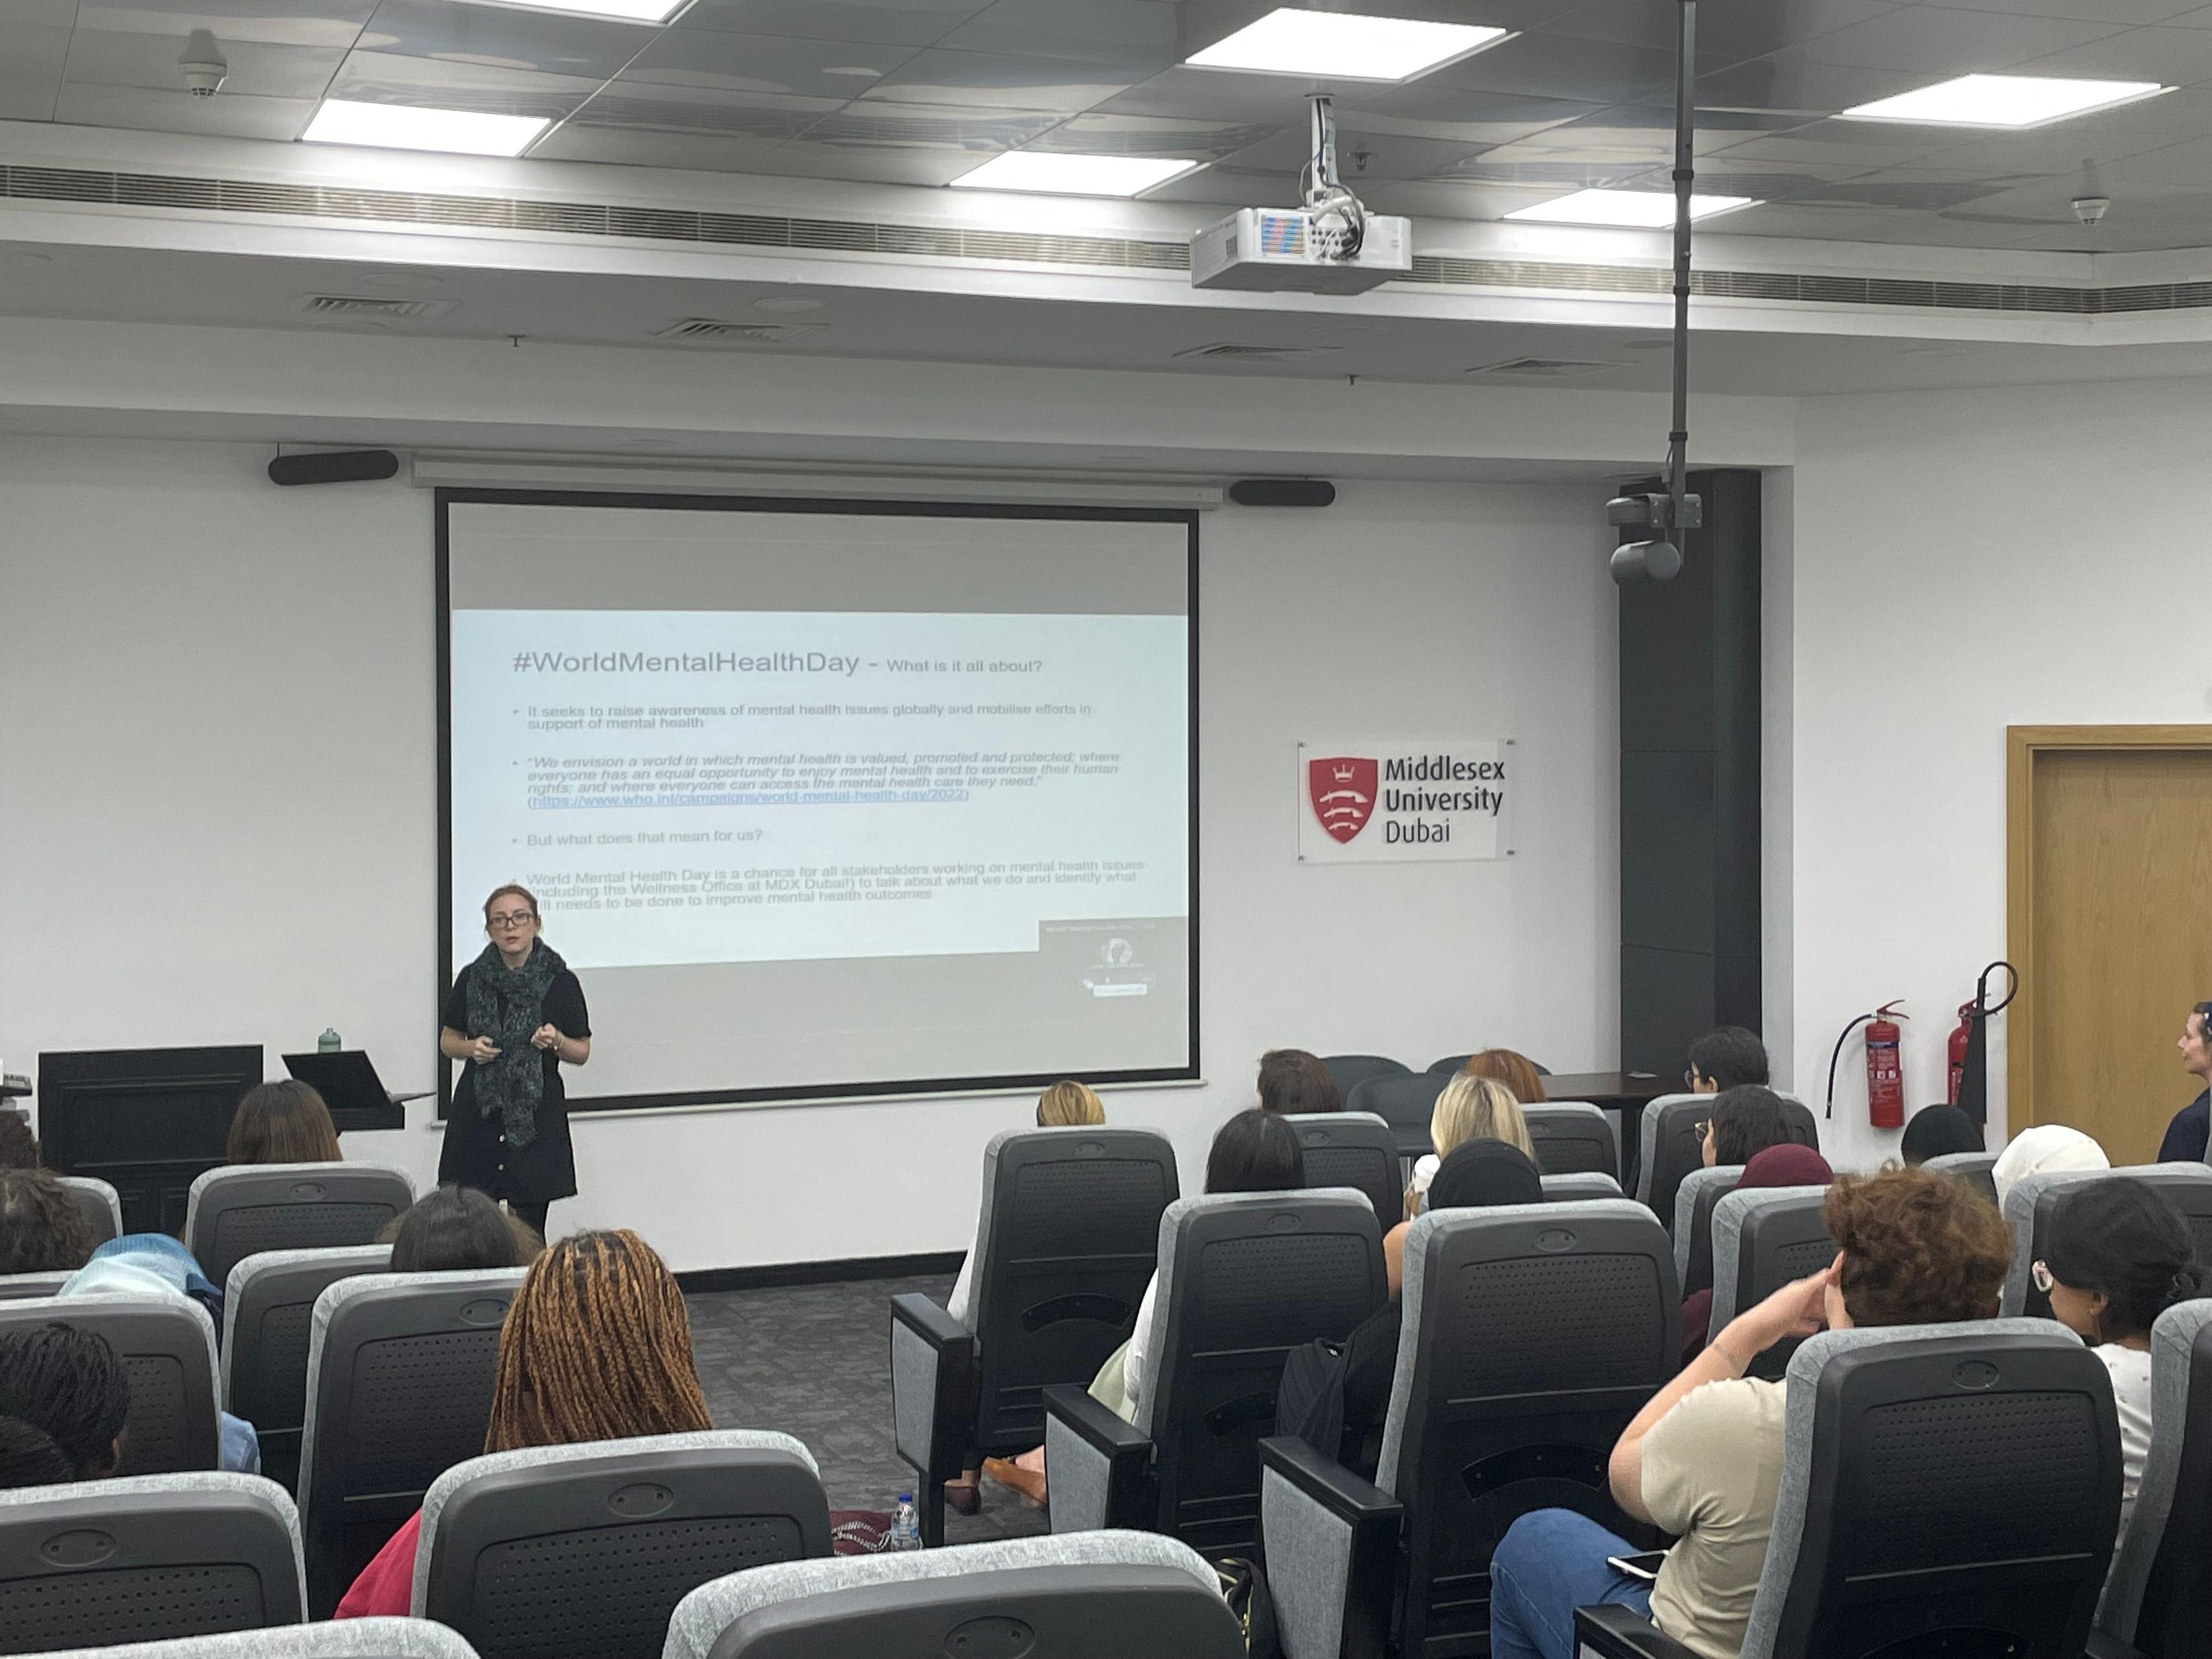 Middlesex University Dubai launches mdxMindset Talks series to open up dialogue about mental health in the UAE